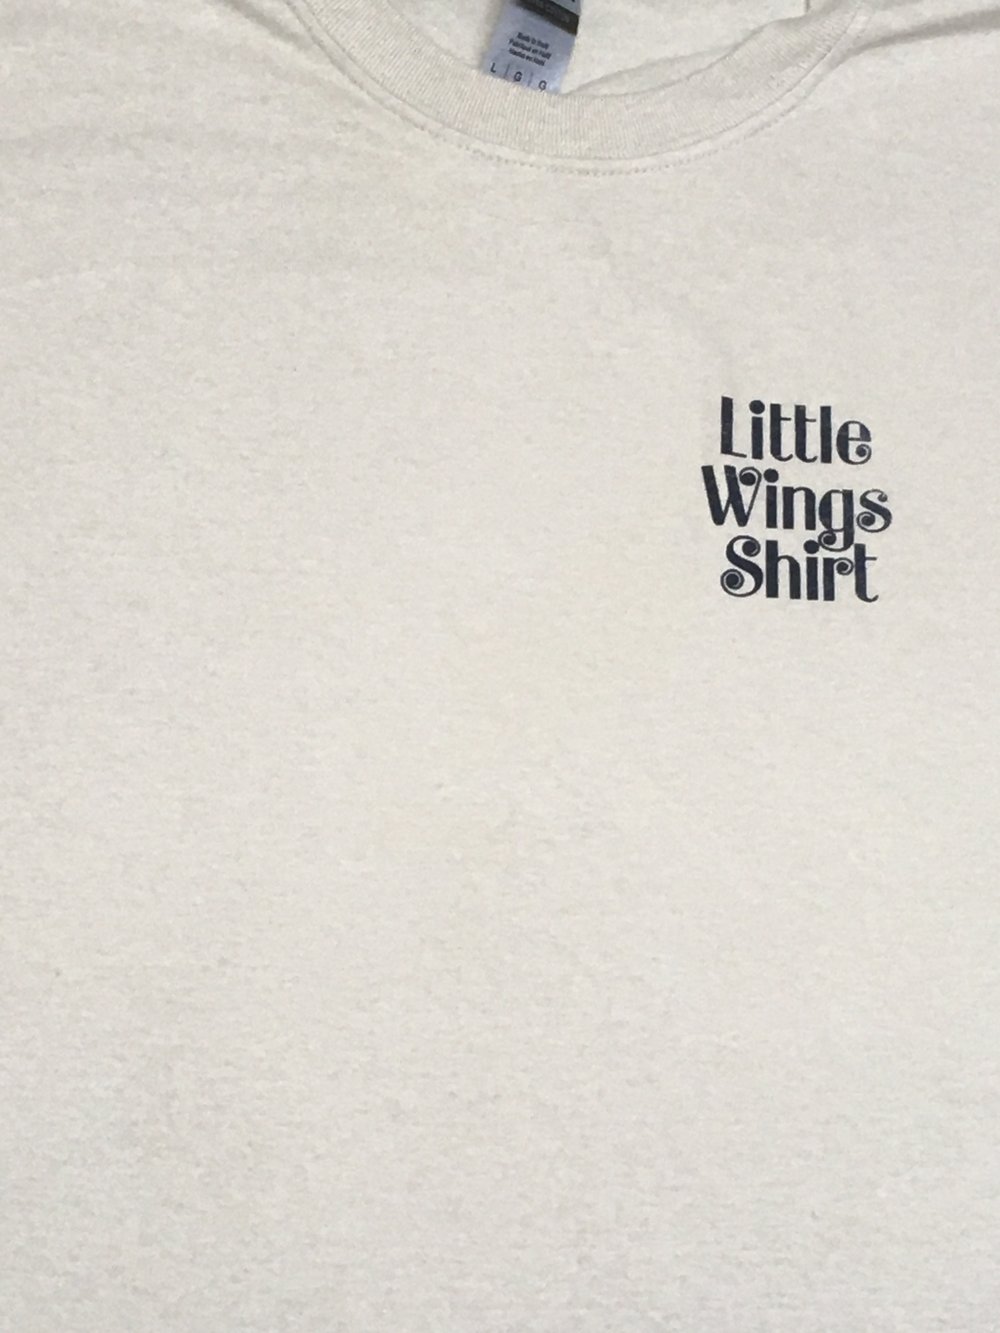 Image of Little Wings Shirt Australian Version (SIZE SMALL ONLY)